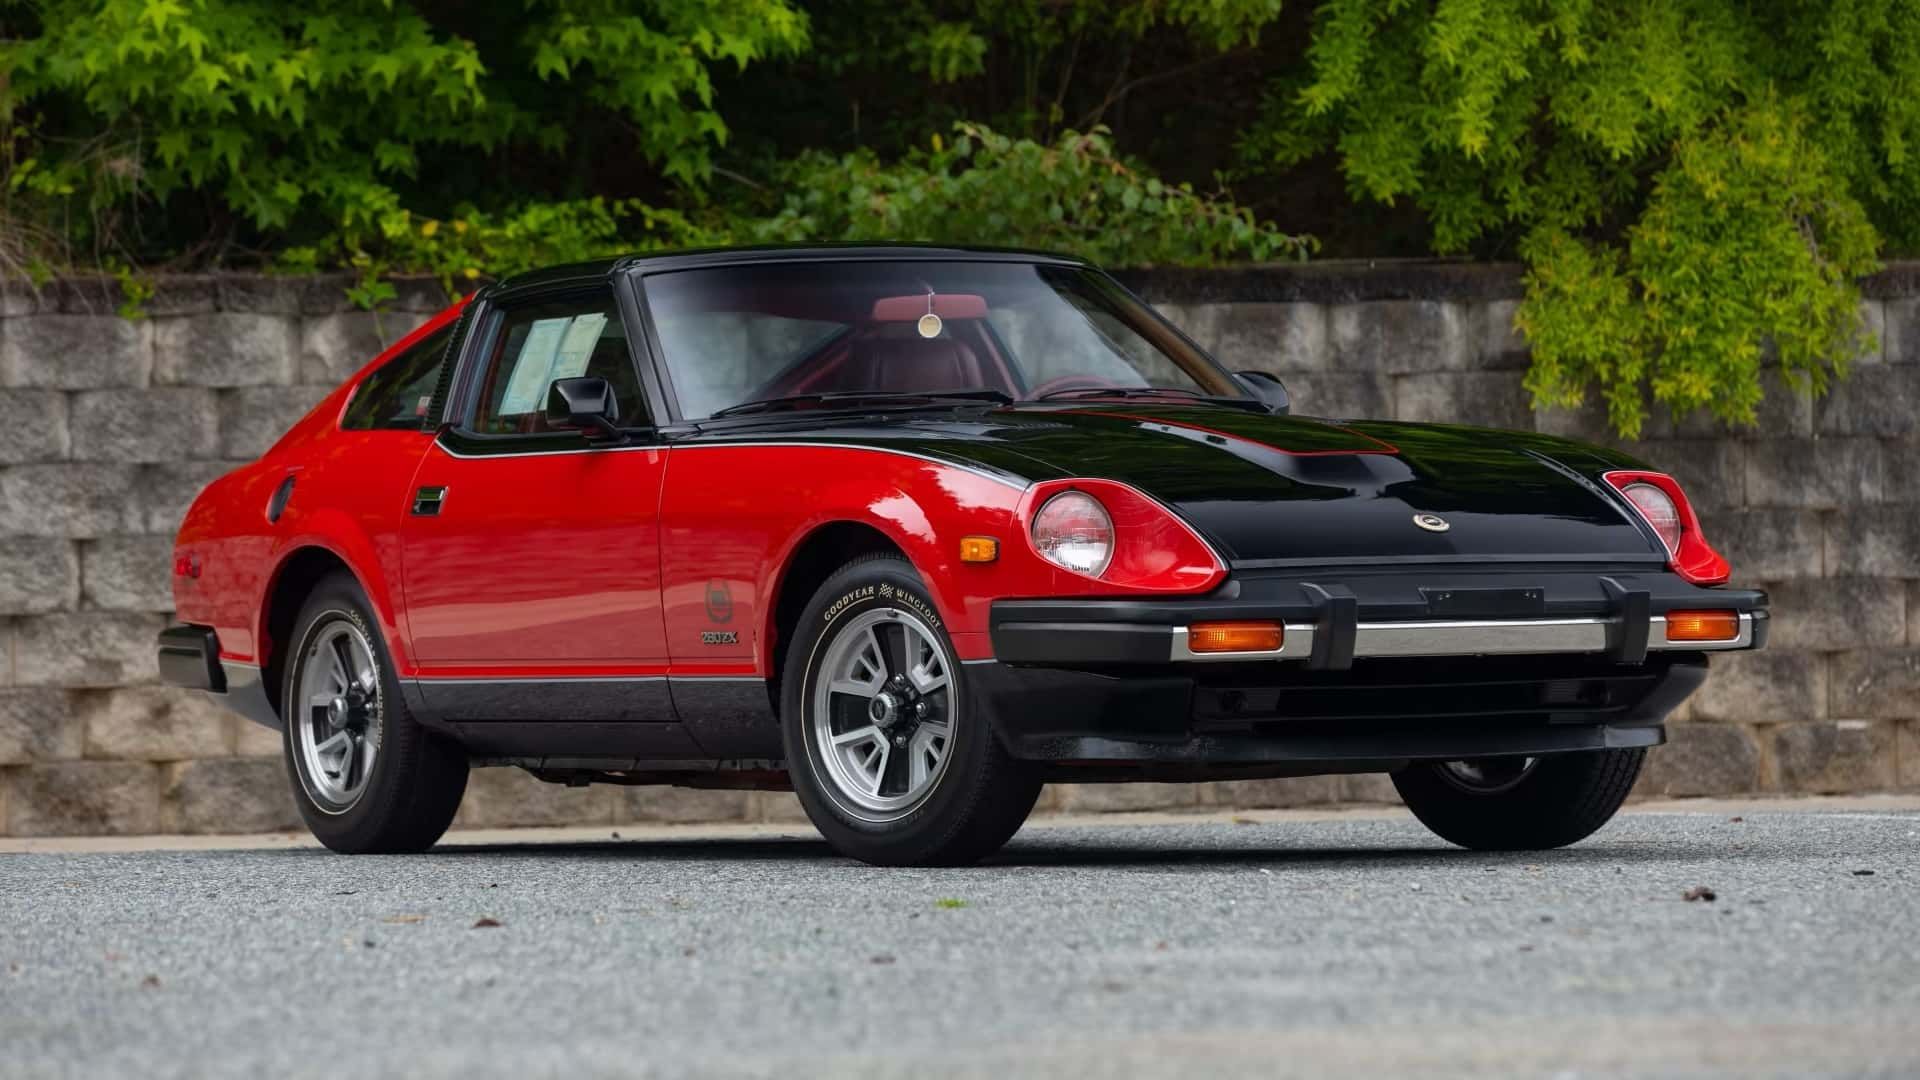 1980 Datsun 280ZX With 28 Miles Sells For $231,000 At…